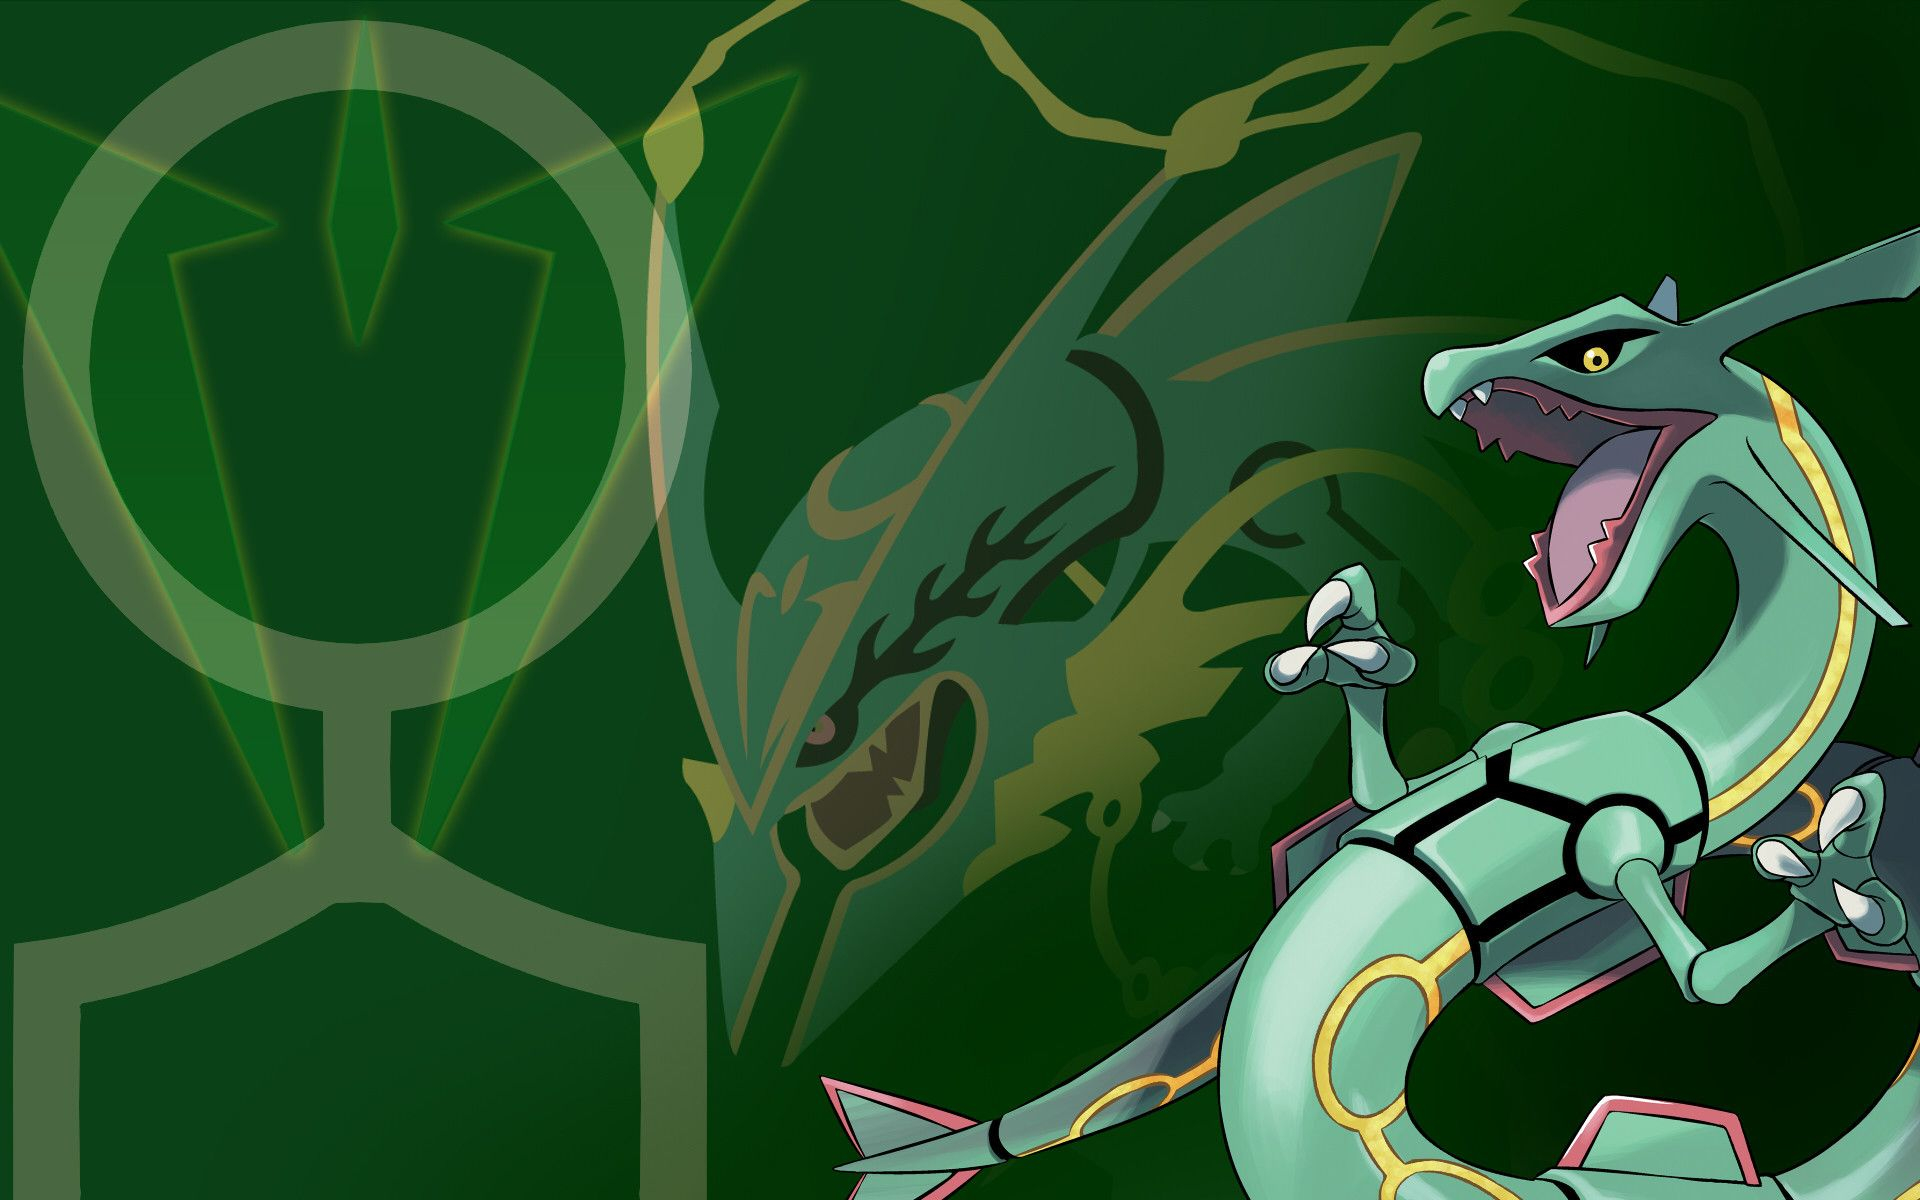 1920x1200 72+ Shiny Rayquaza Wallpapers on WallpaperPlay | Rayquaza wallpaper, Pokemon rayquaza, Pokemon charizard